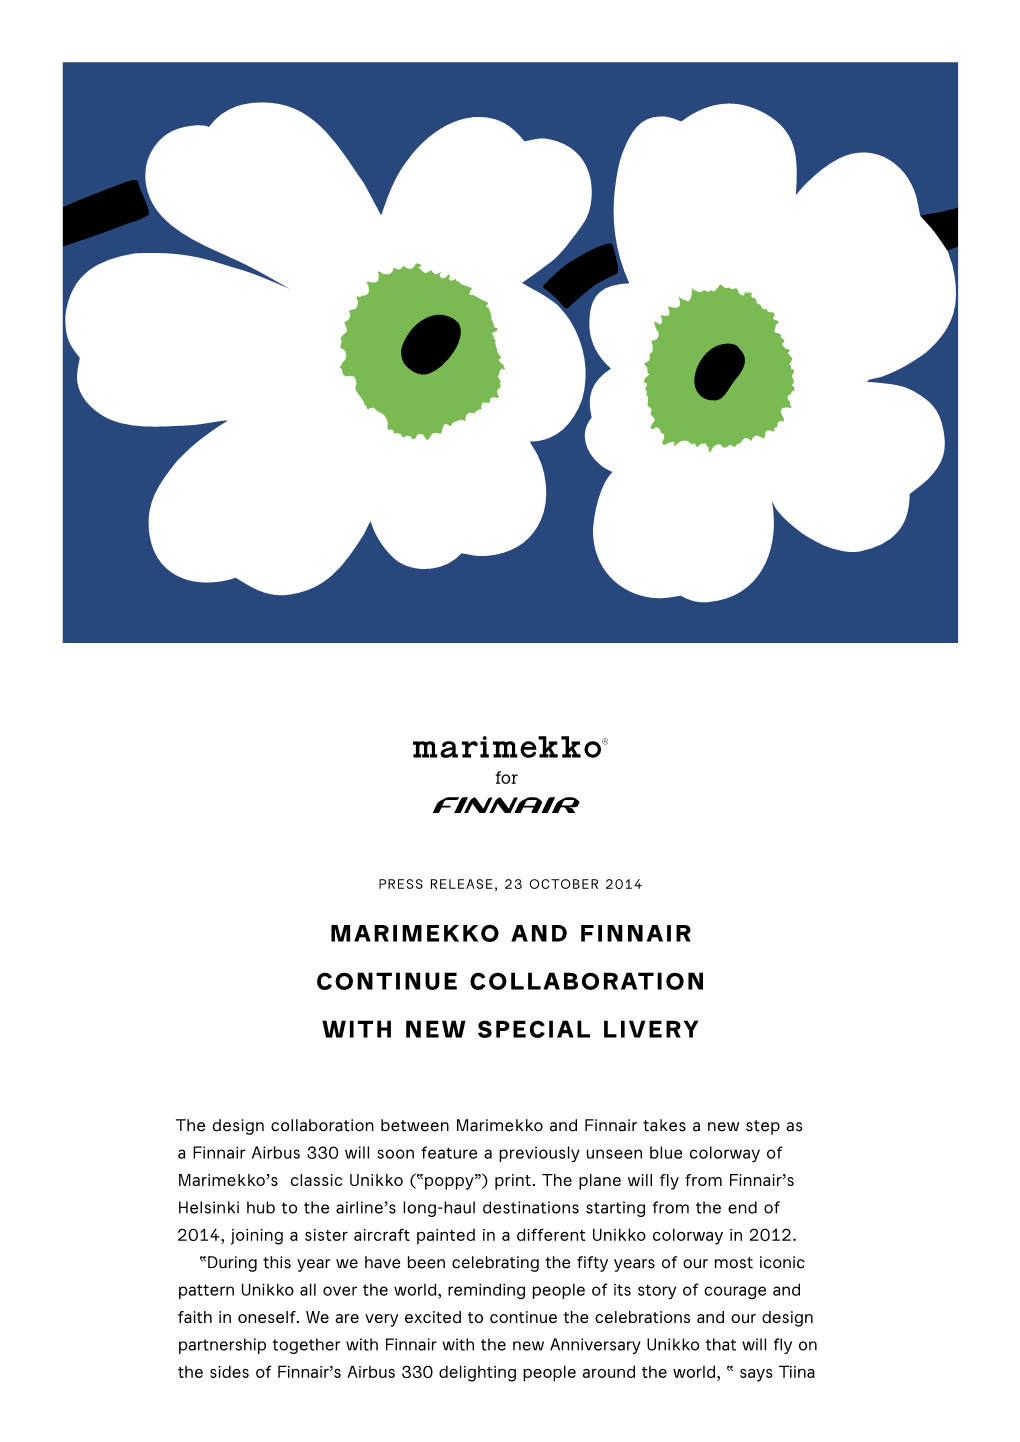 Marimekko and Finnair Continue Collaboration with New Special Livery